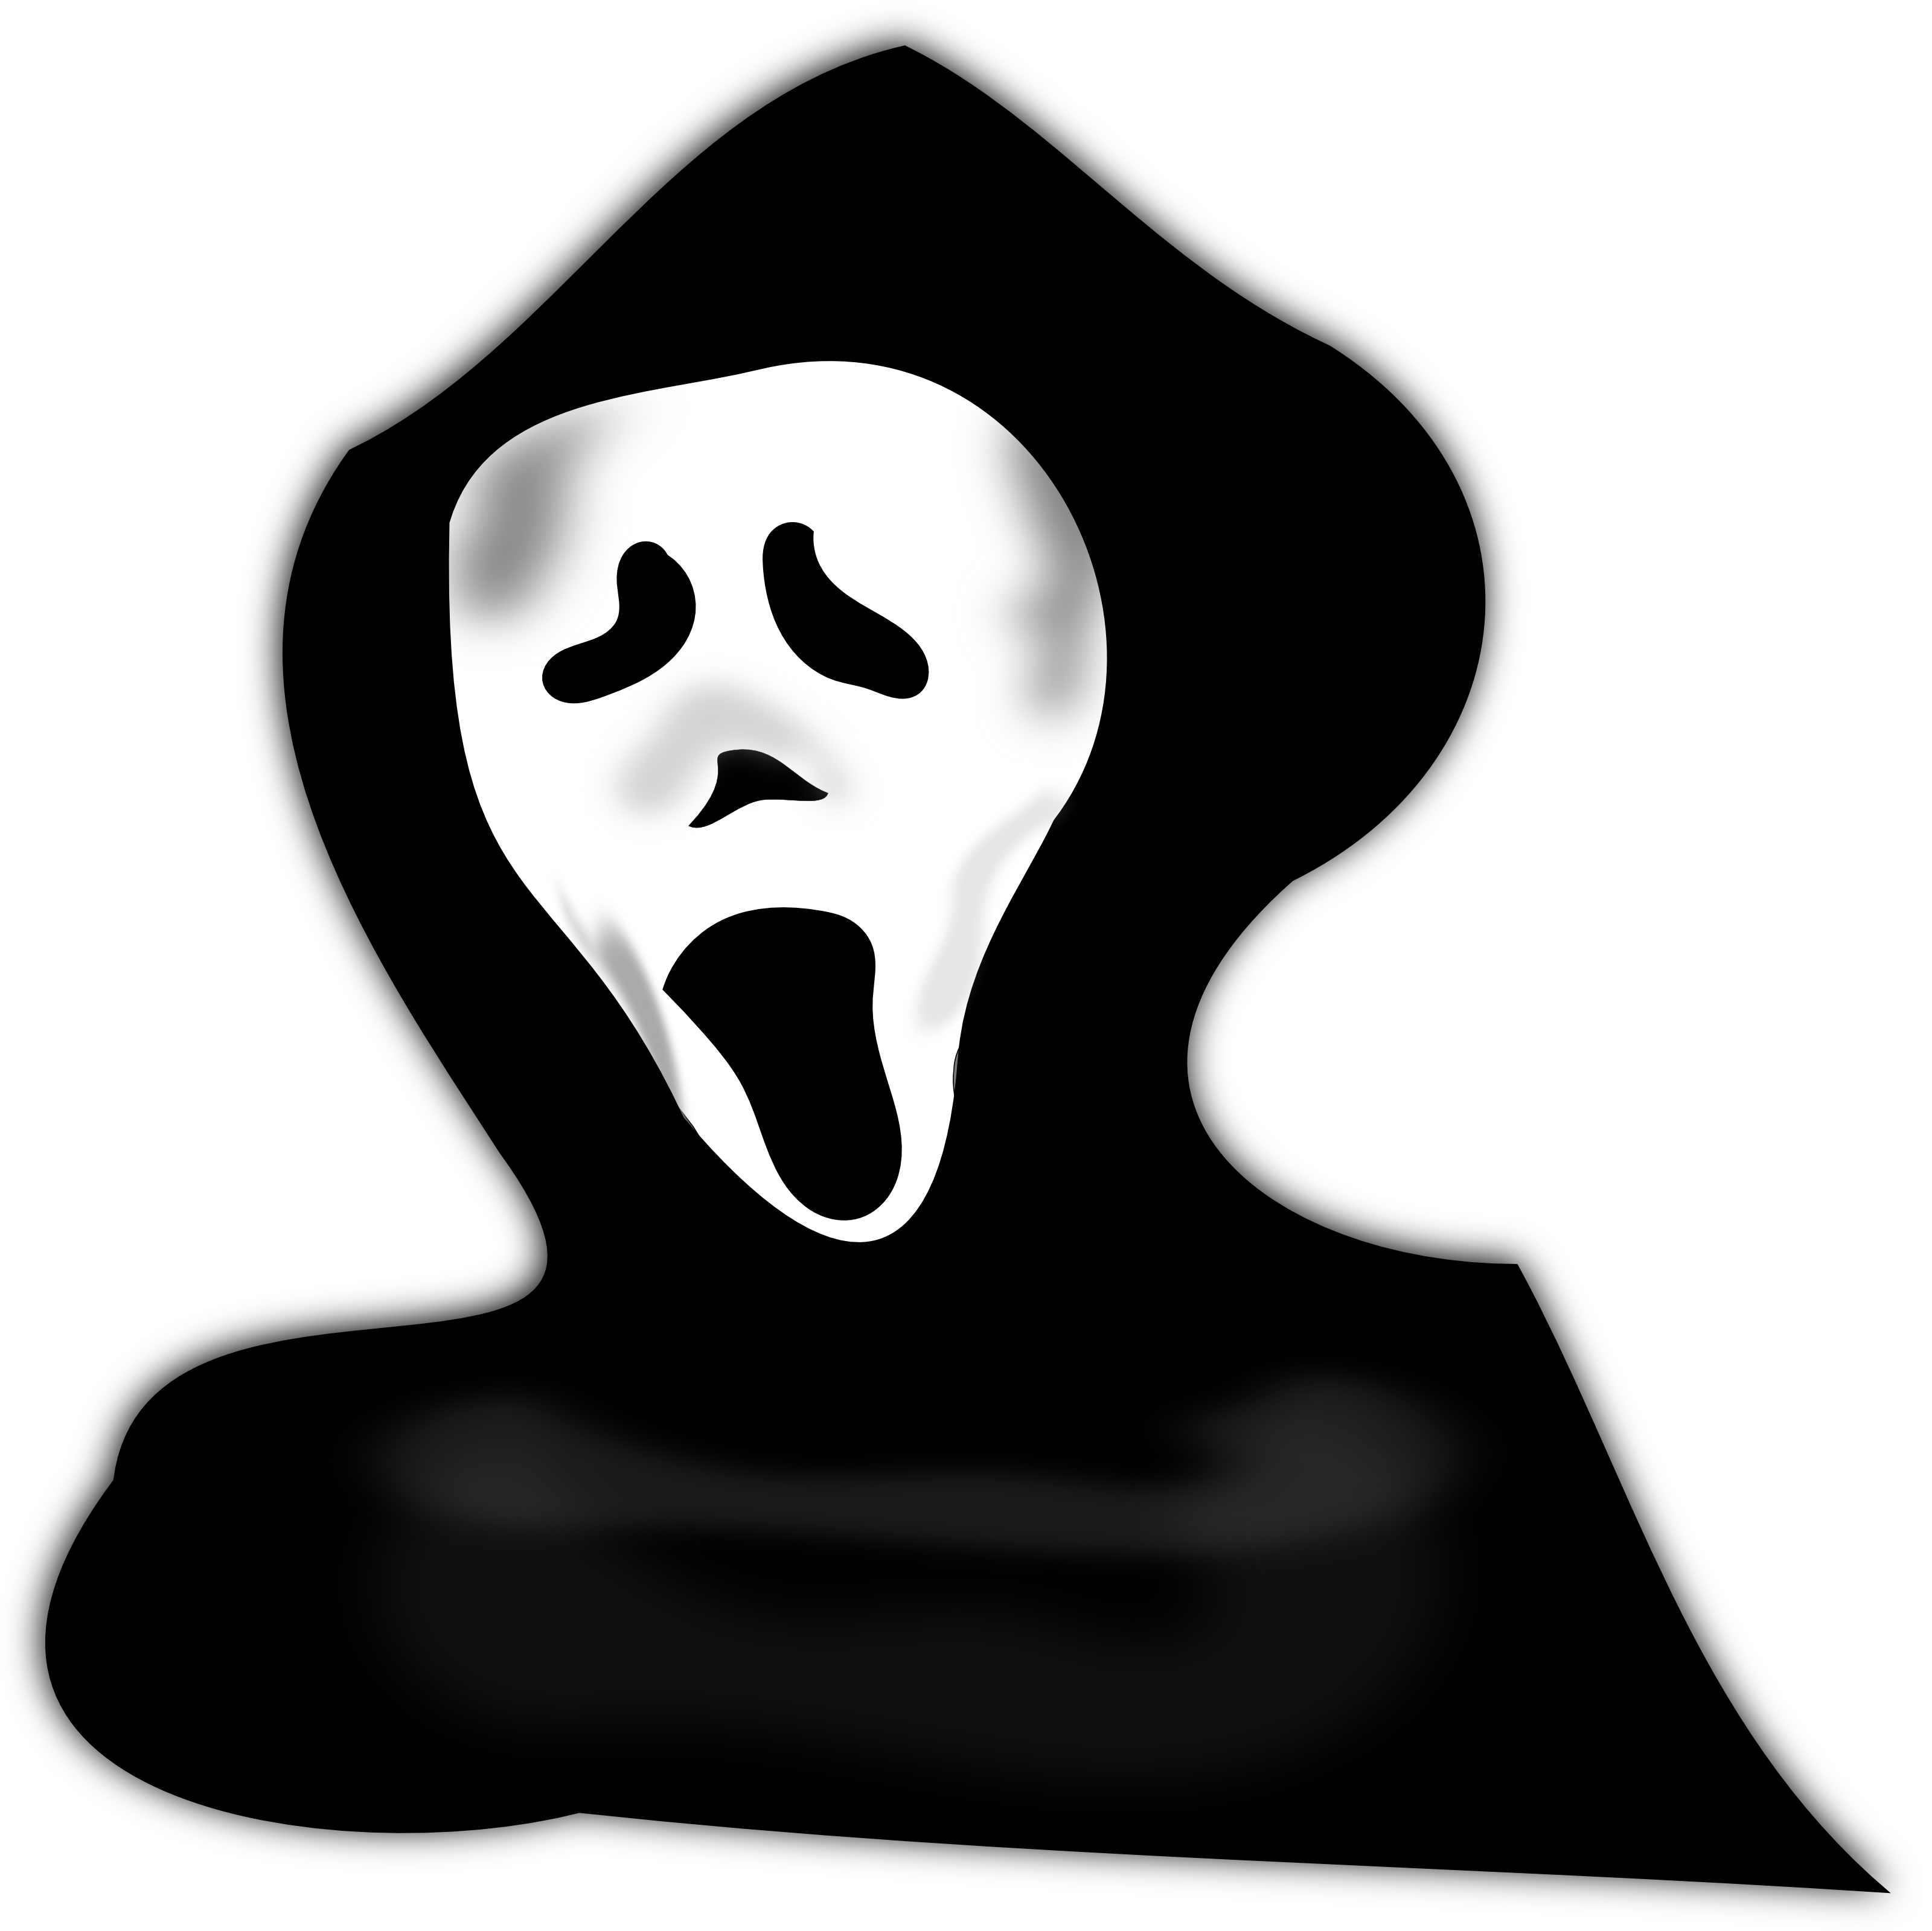 Halloween Ghost Png Photos - Ghost Pictures, Transparent background PNG HD thumbnail